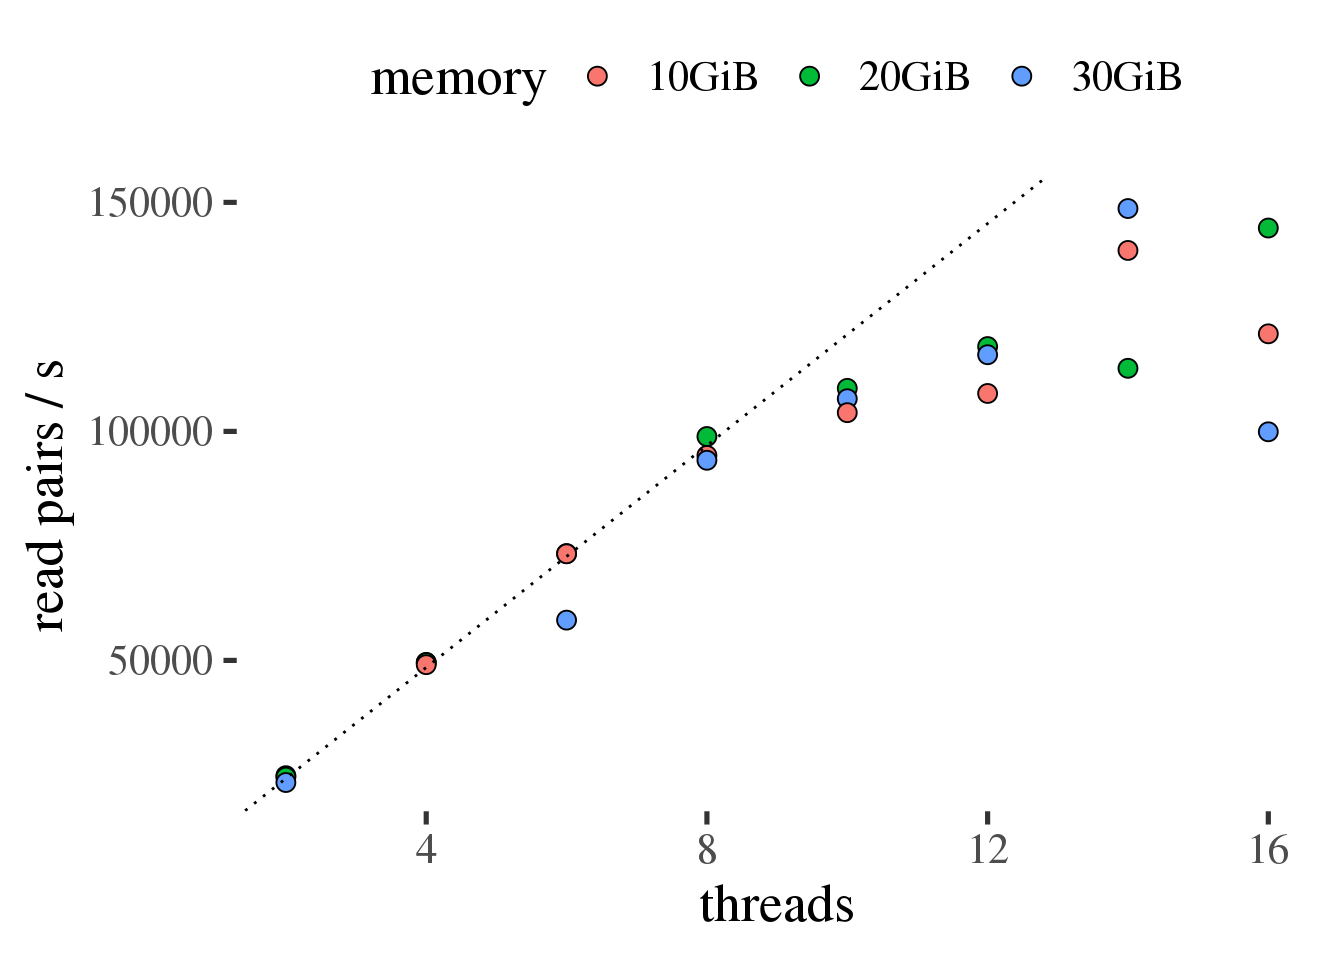 Throughput of samtools sort in read pairs per second as a function of the number of threads. Ideal scaling is shown as a dotted line.